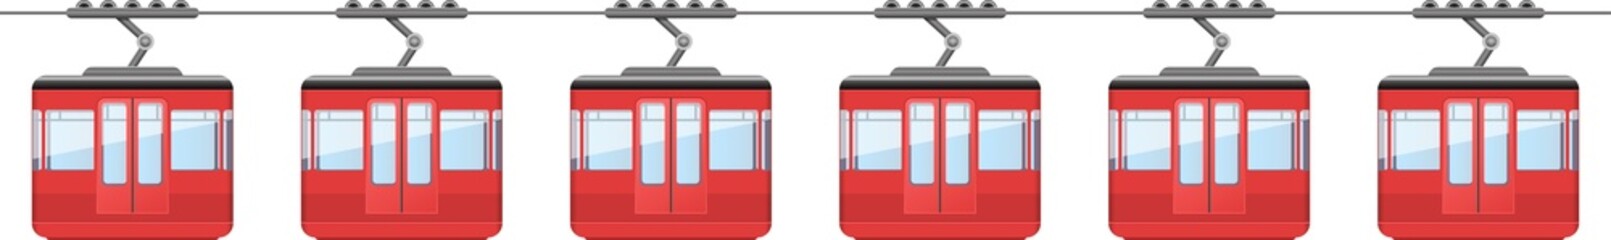 Cableway funicular clipart design illustration